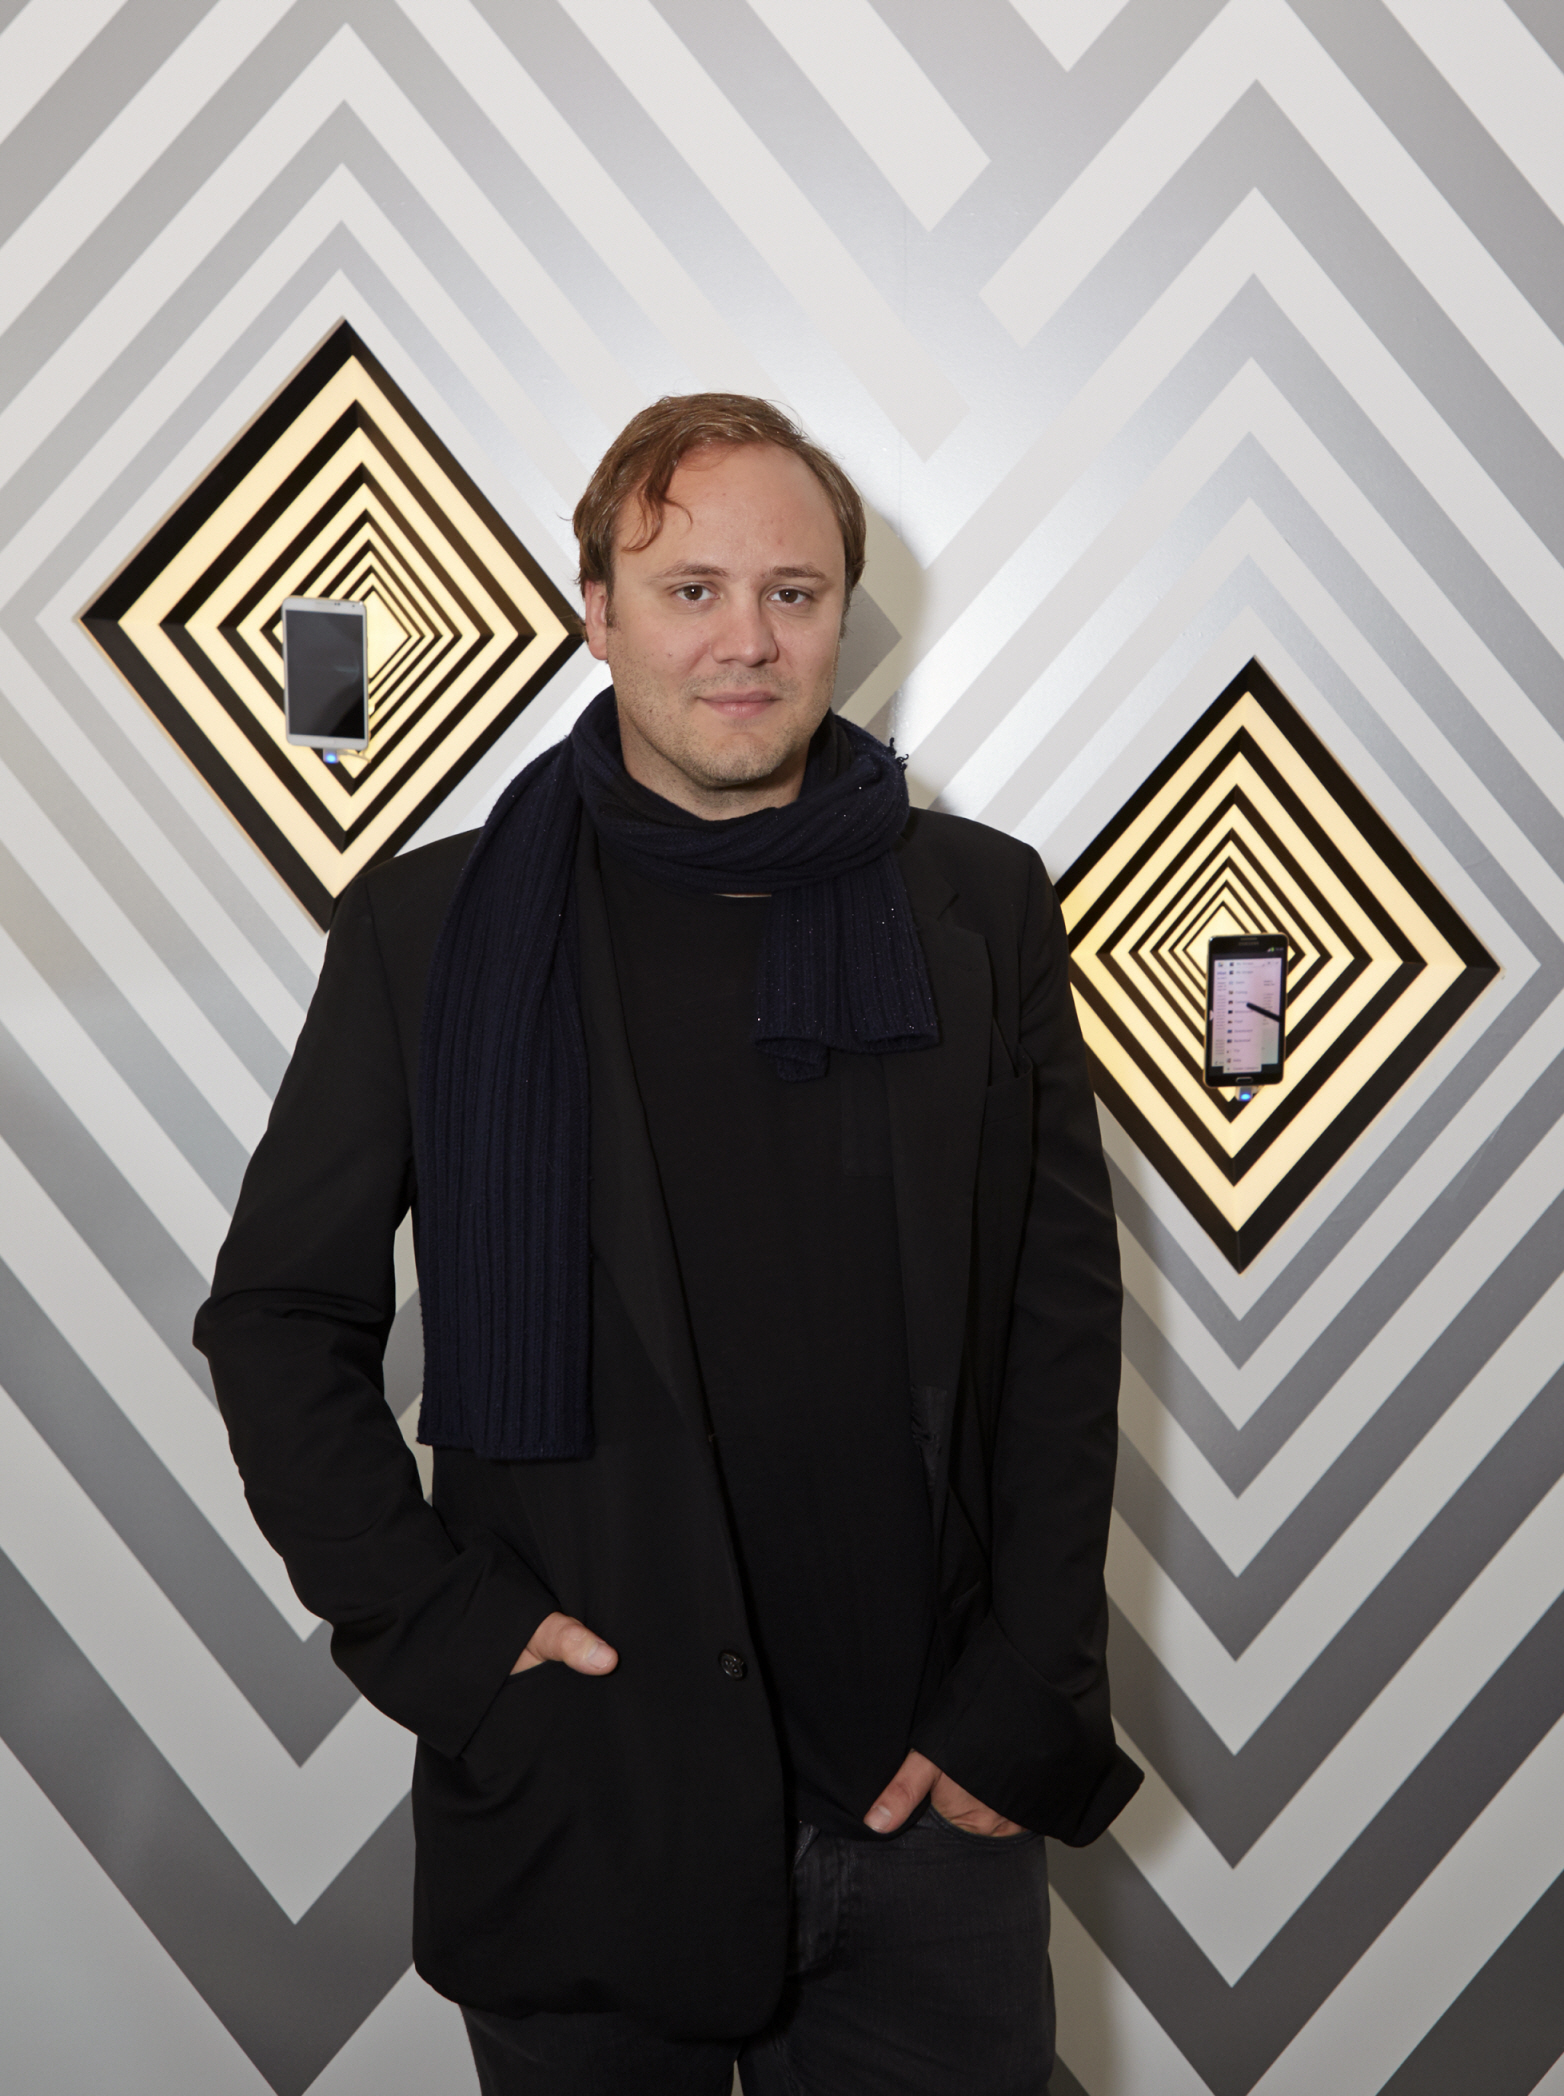 Samsung and Designer Nicholas Kirkwood Unveil Exclusive Galaxy Note 3 Accessories at London Fashion Week